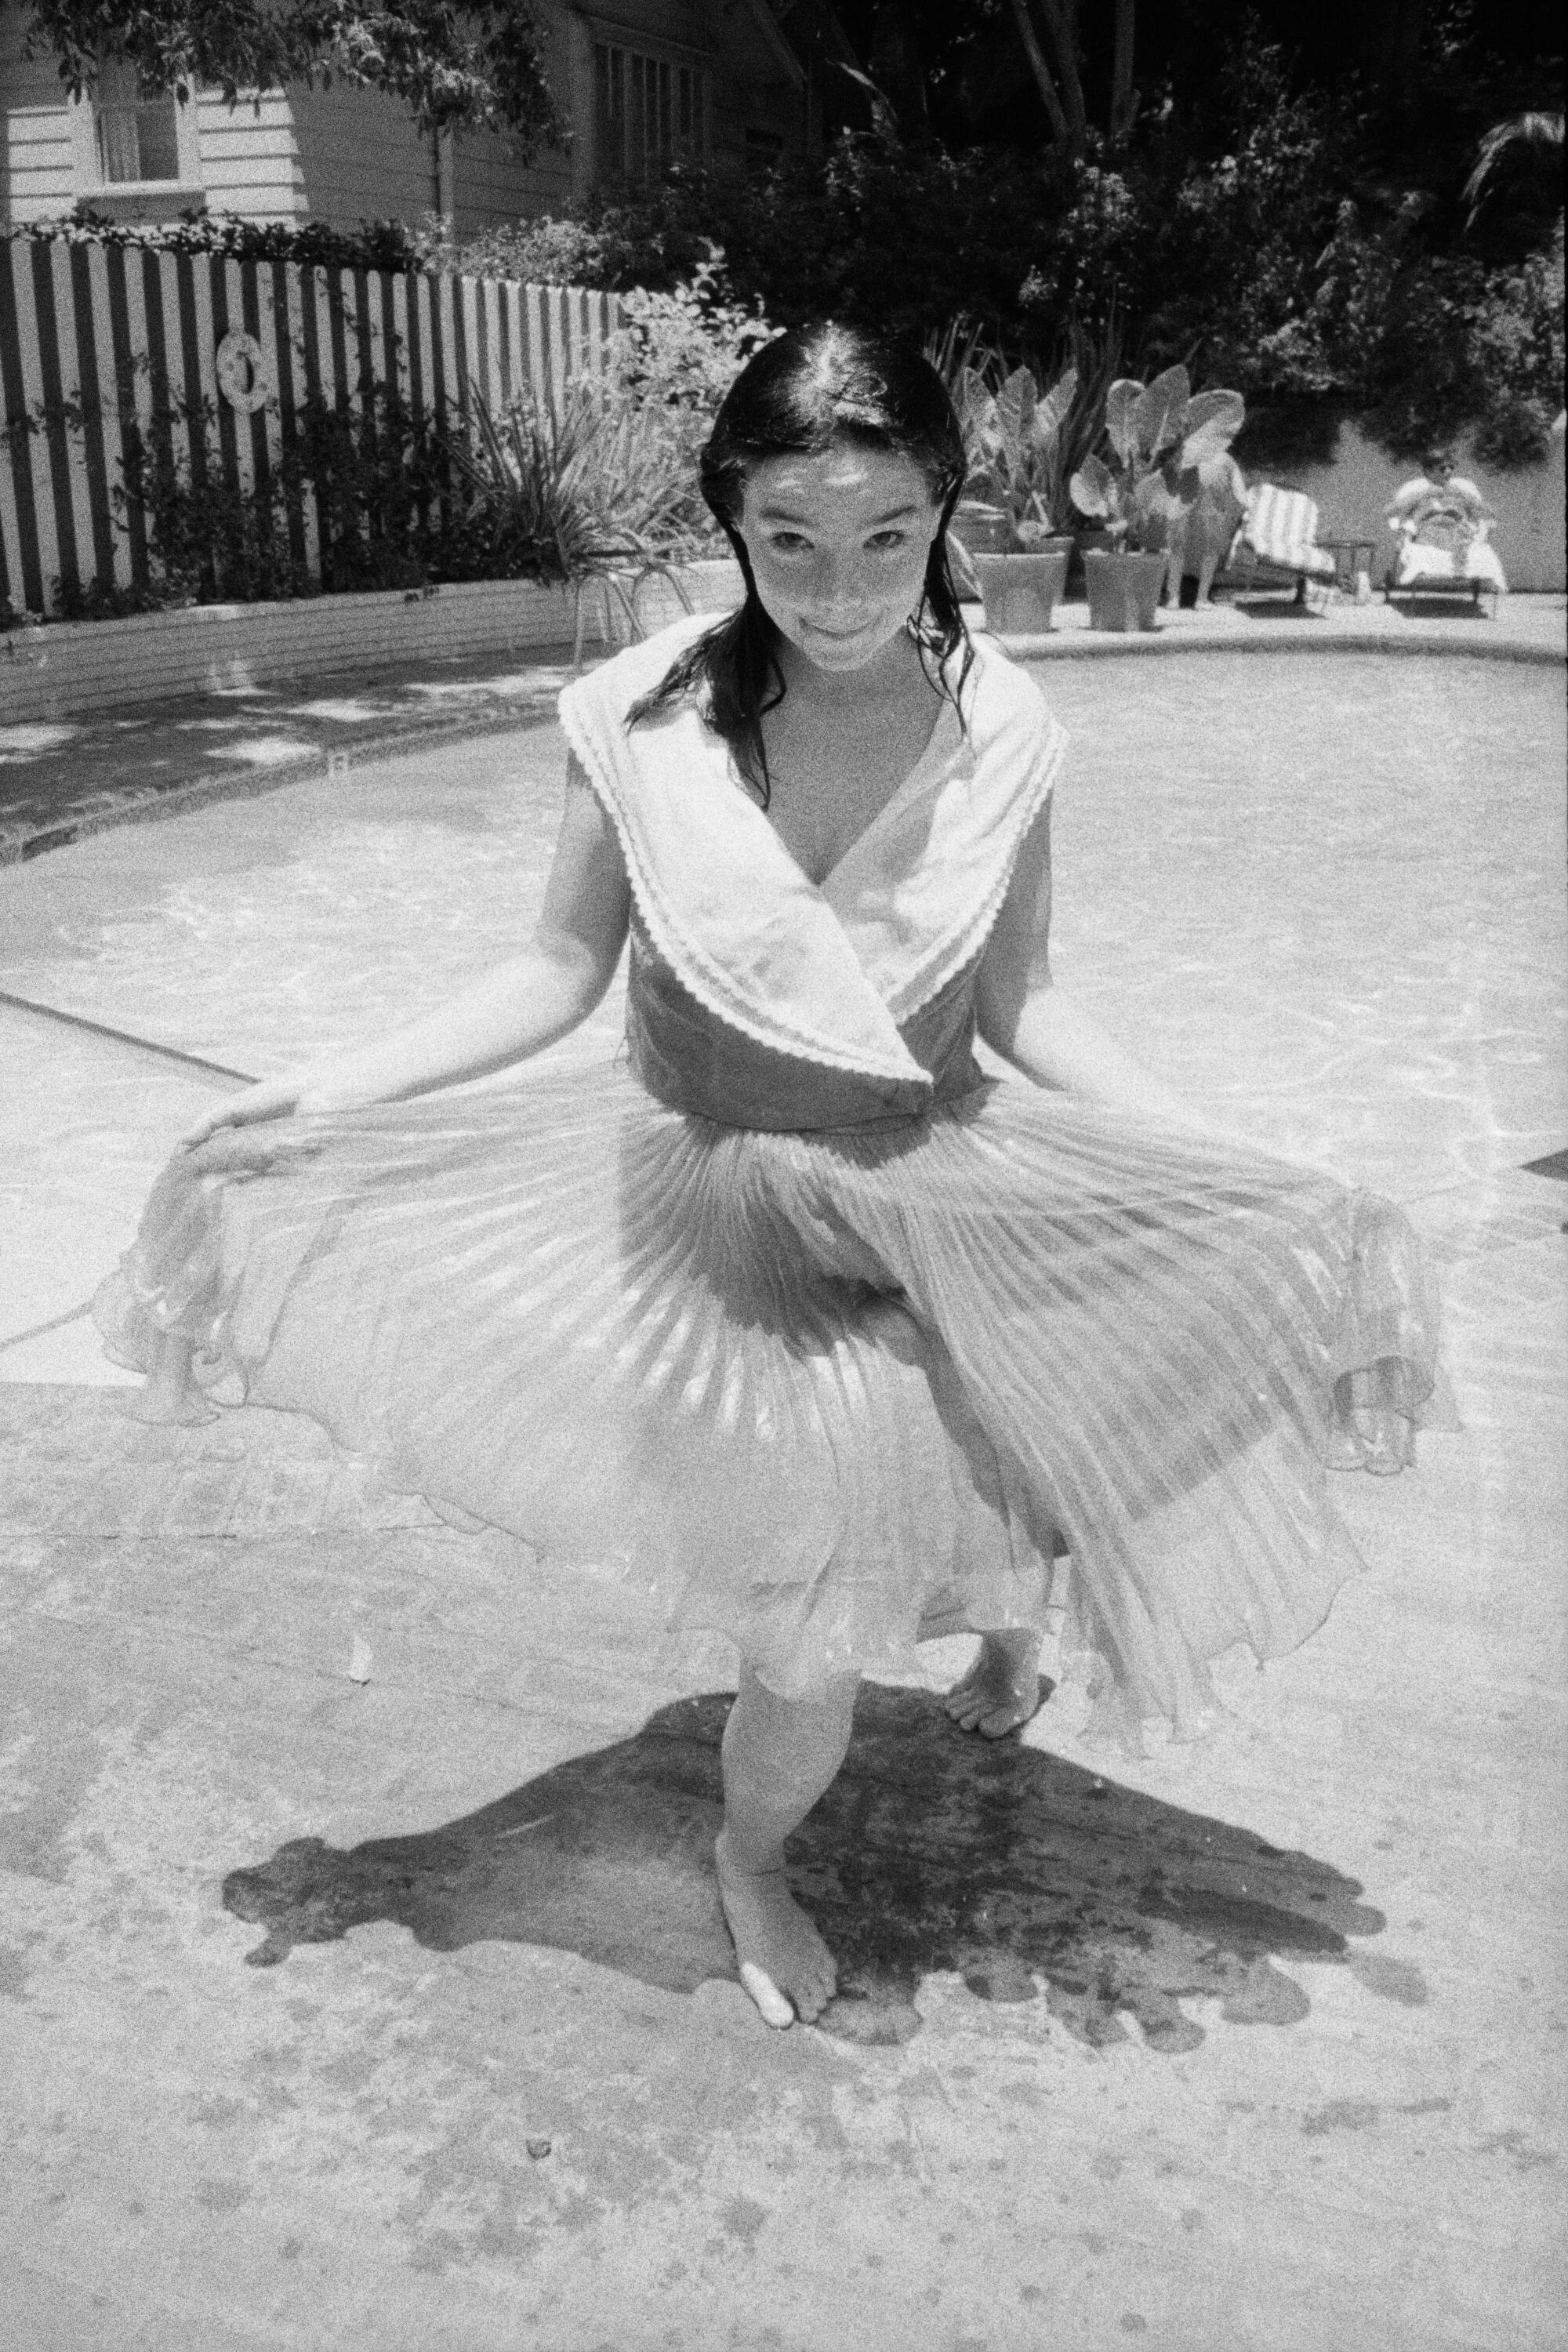 A black-and-white photo of Bj?rk holding up the edges of her dress as she stands in front of a swimming pool.